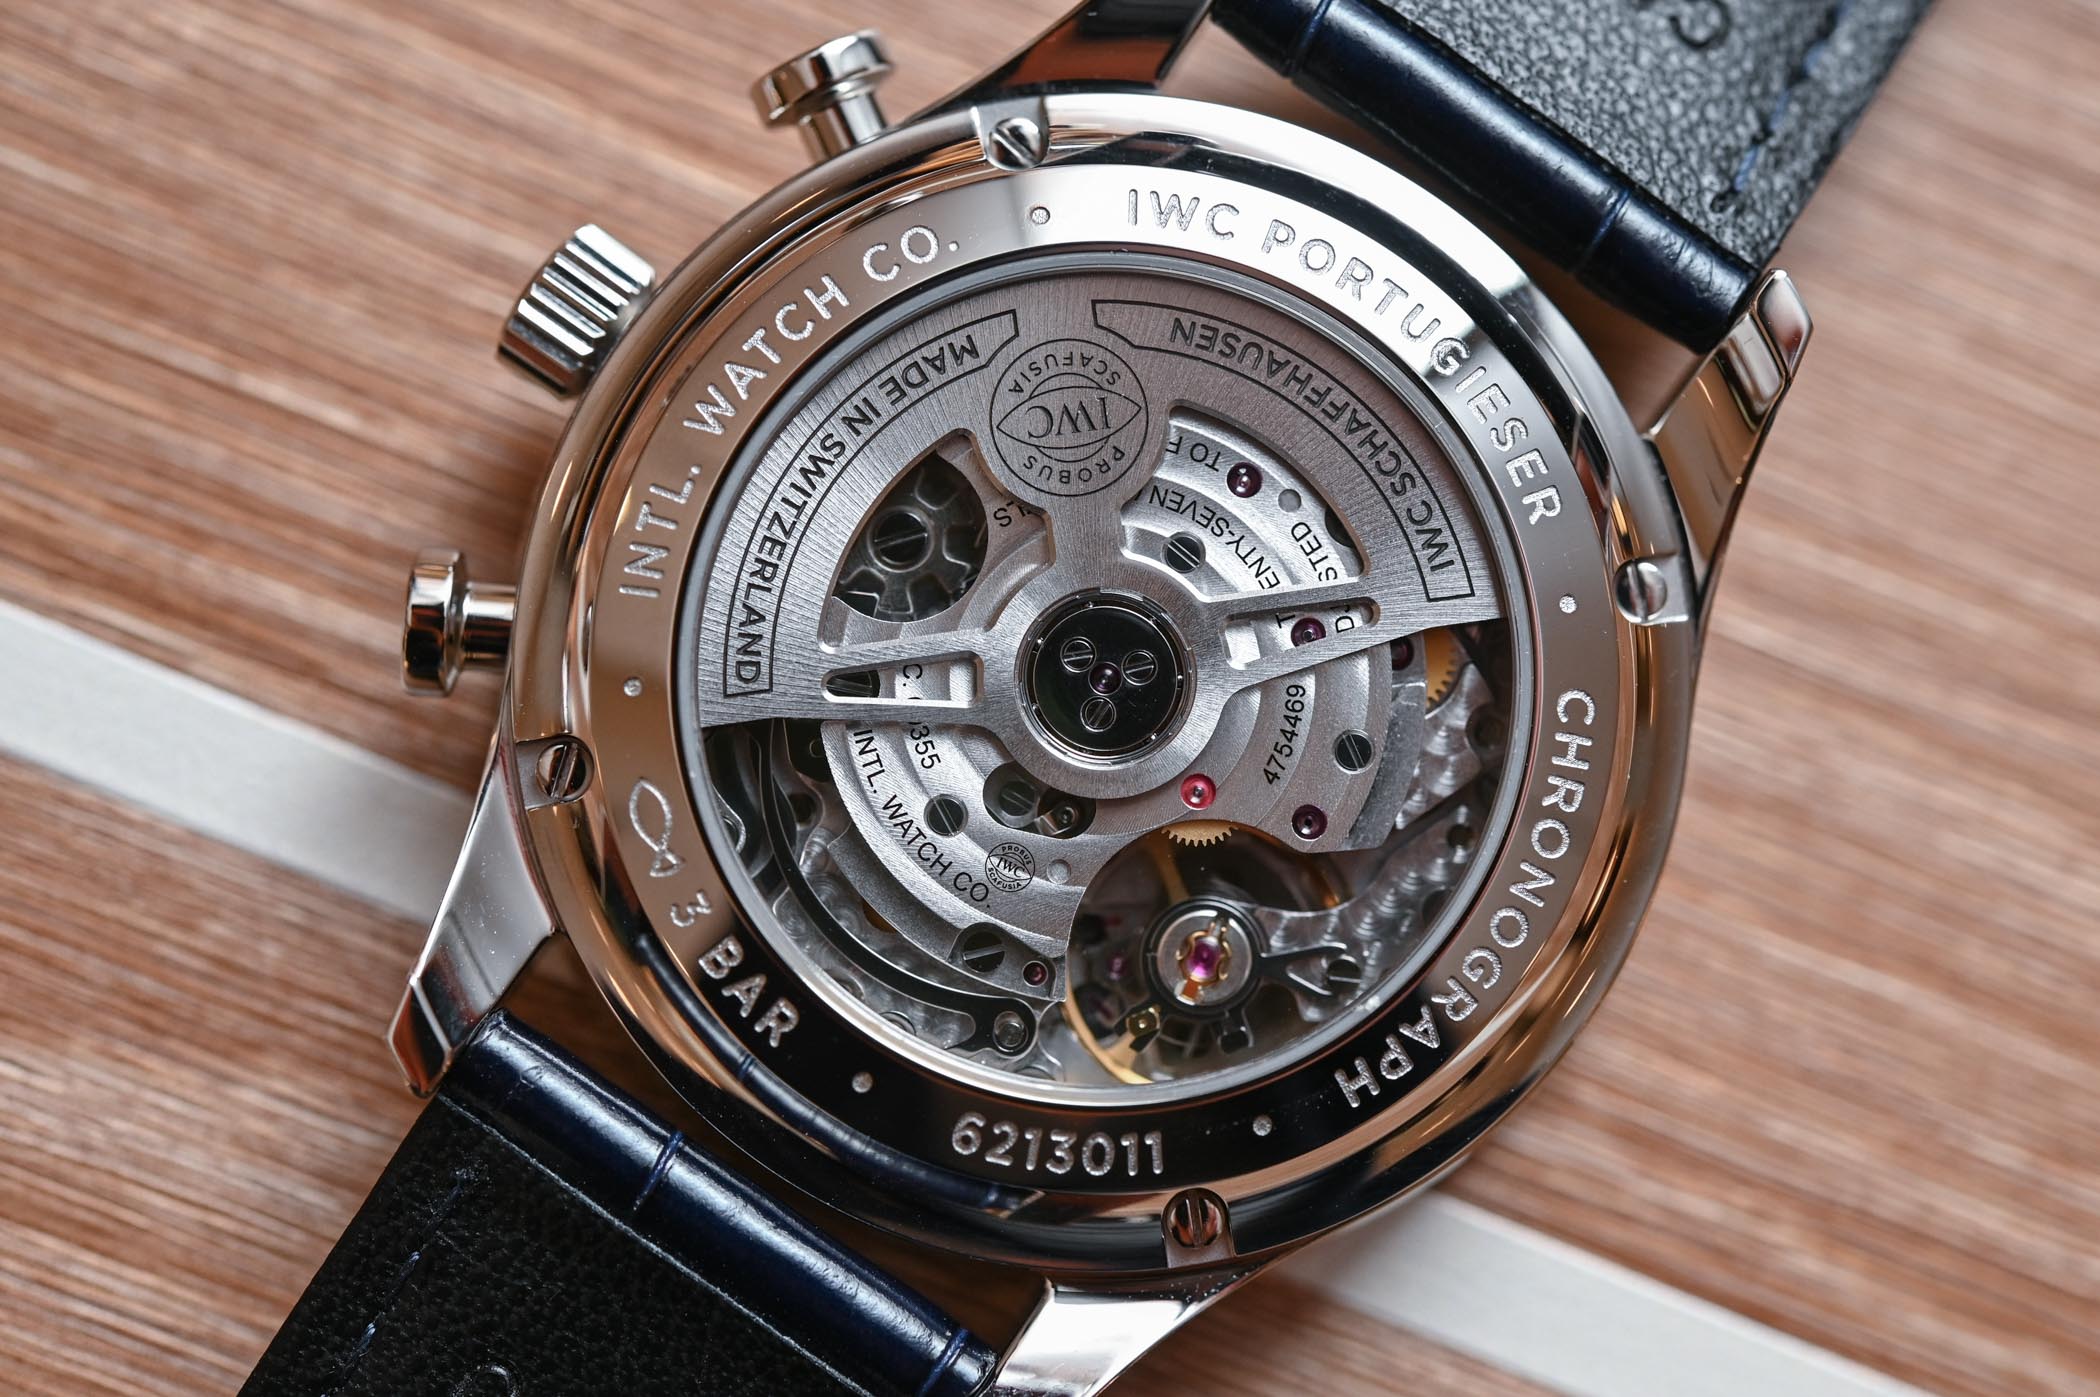 IWC Portugieser Chronograph 3716 in-house movement